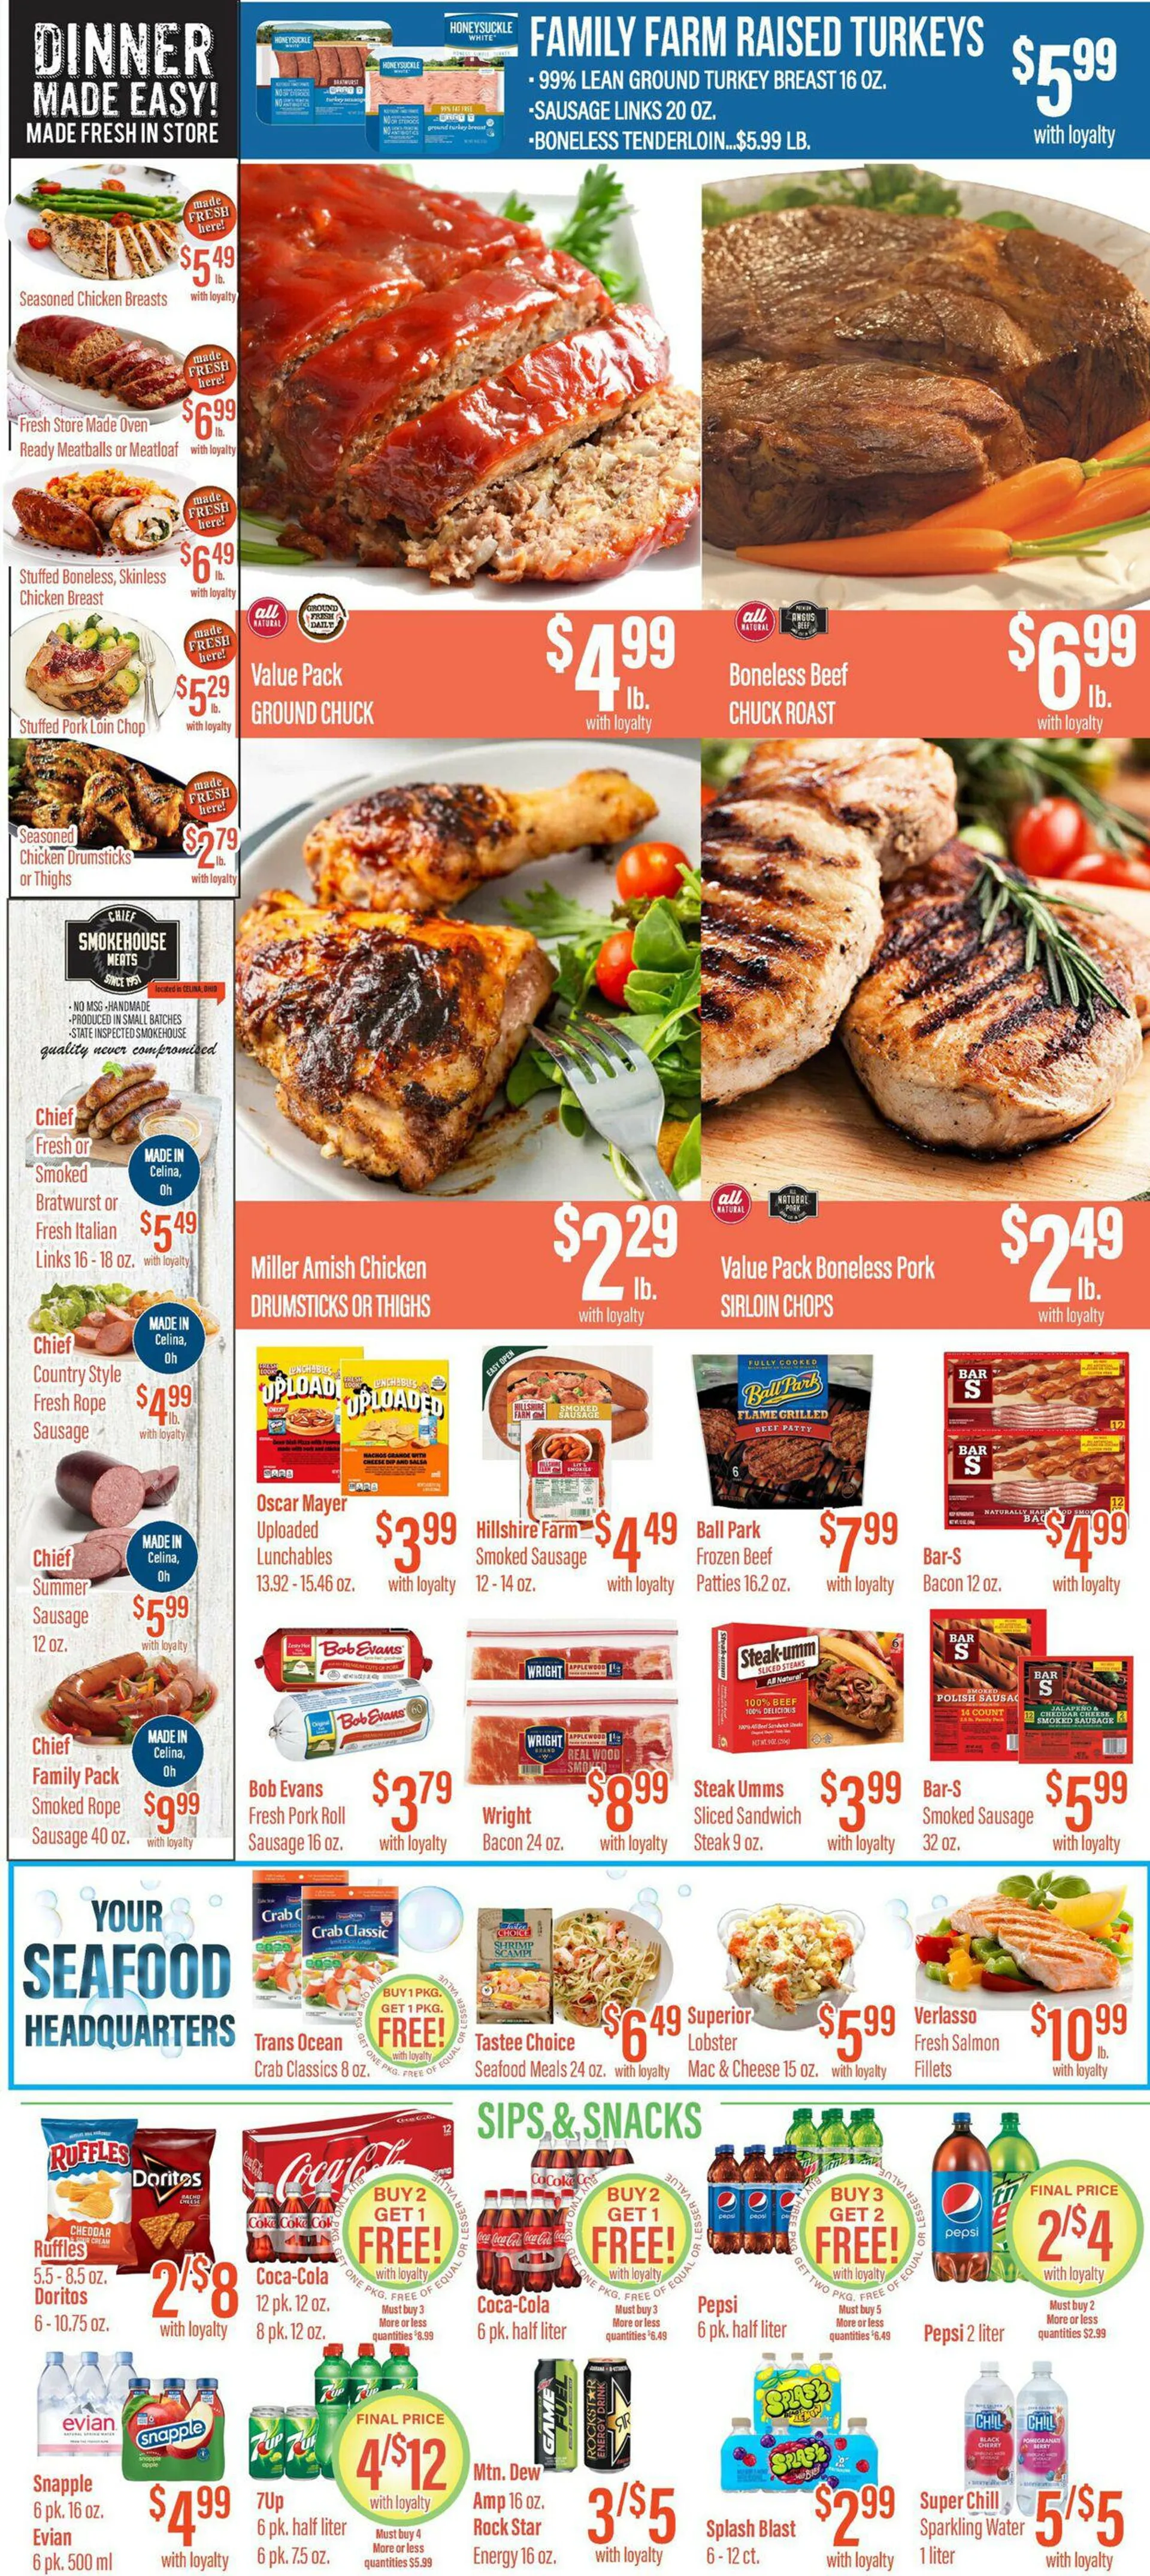 Remke Markets Current weekly ad - 3